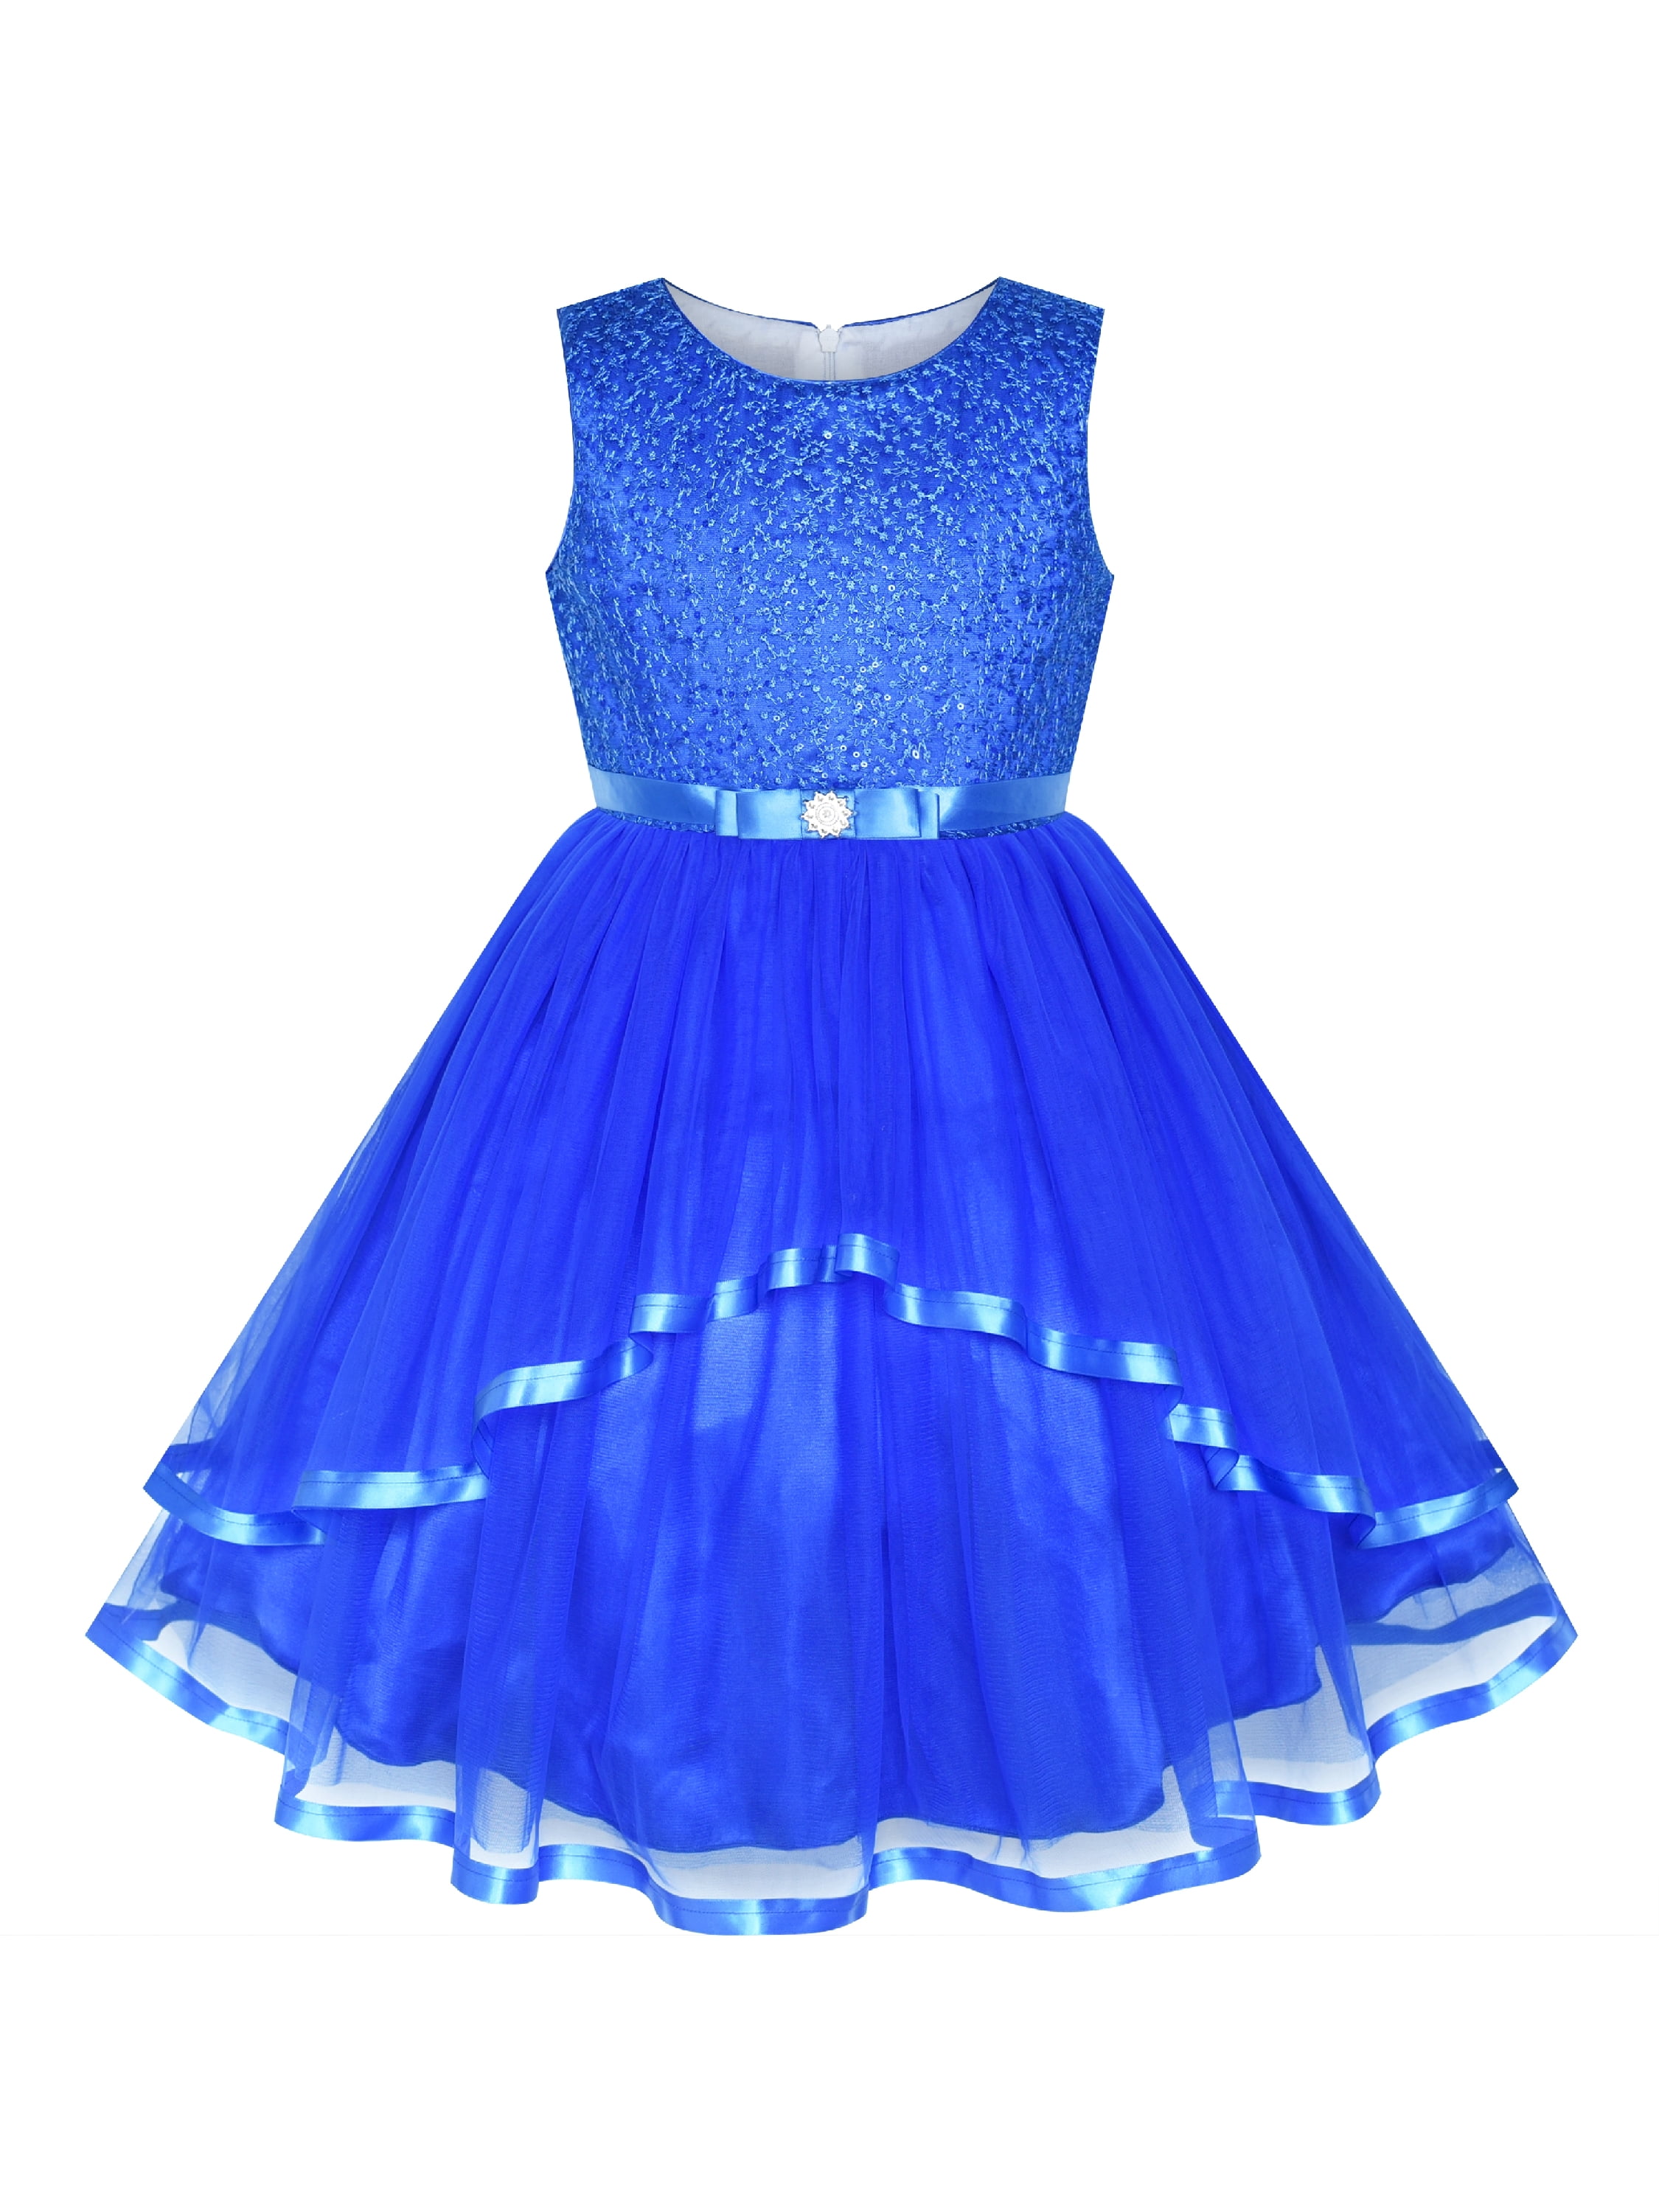 kids Showtime Flower Girls Summer Sequin Chiffon Special Occasion Party Princess Dress